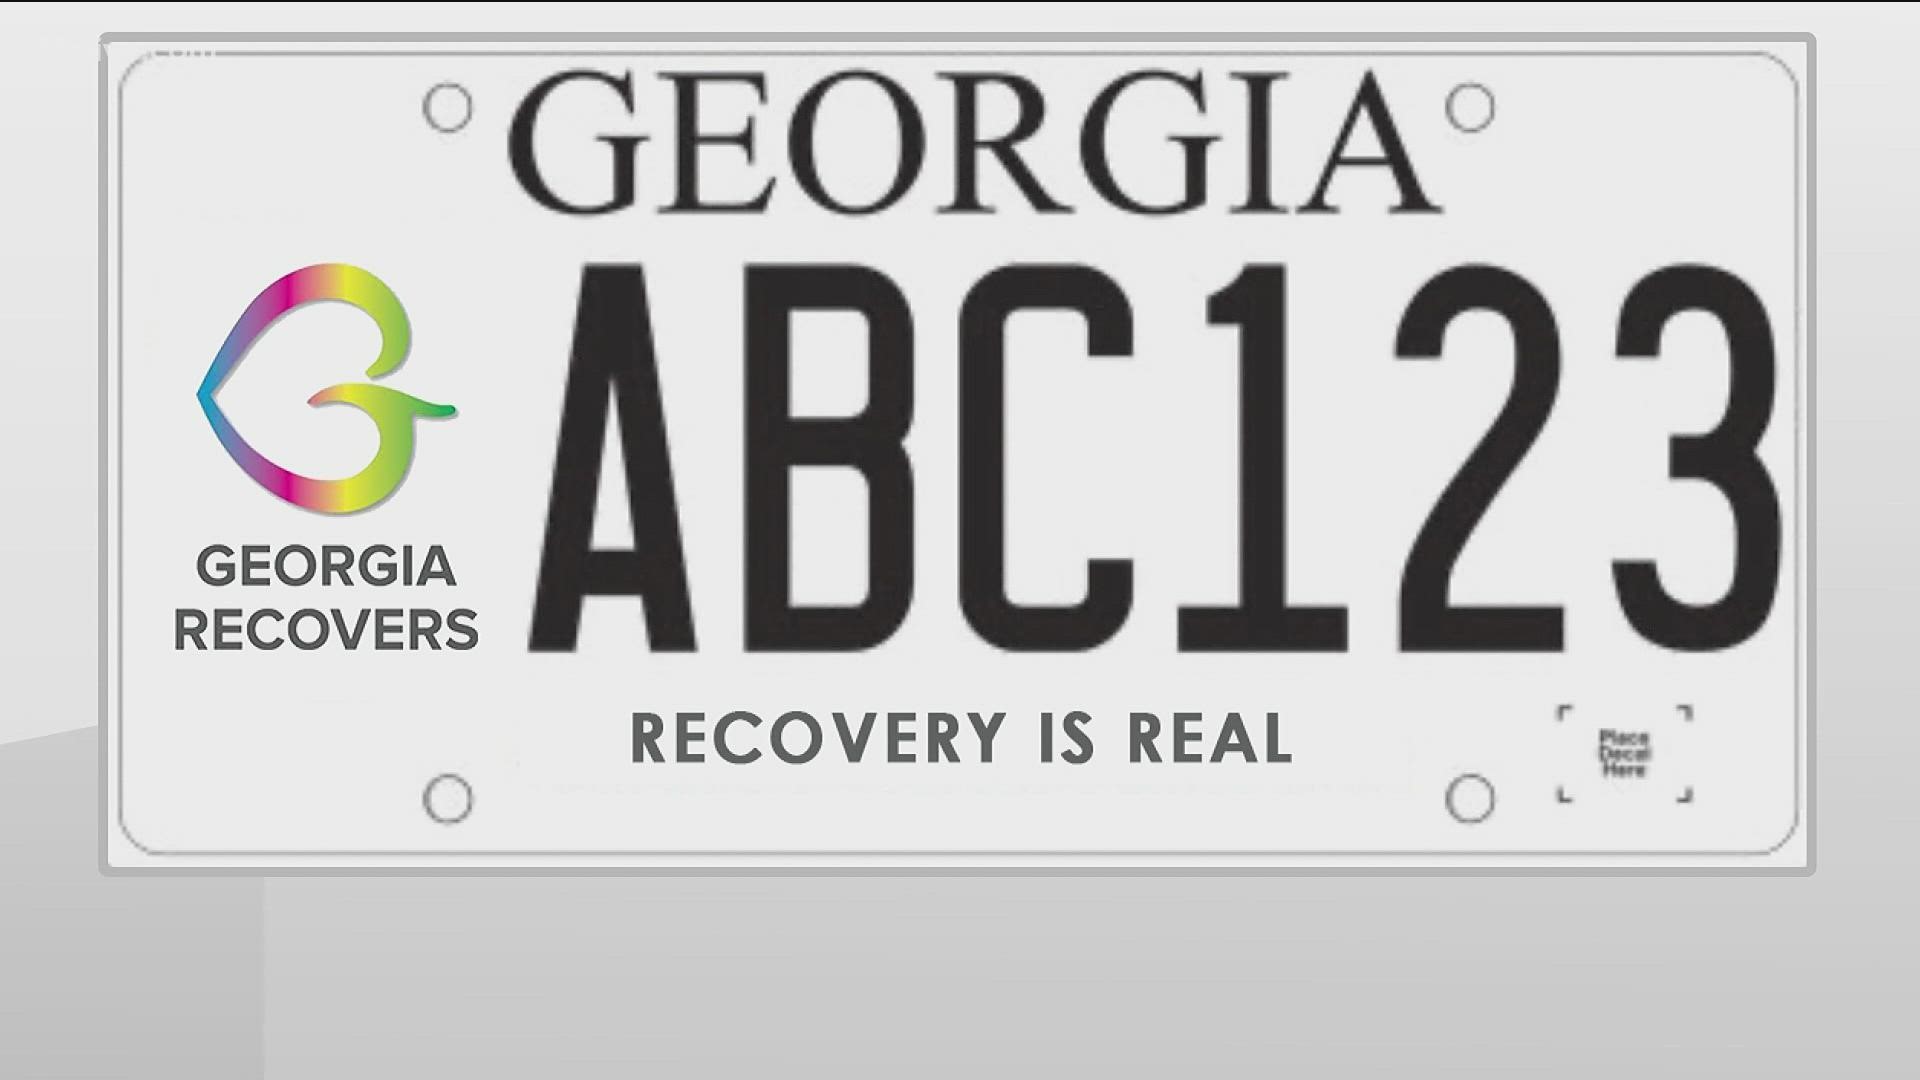 The "Georgia Recovers" plate will go to production once 1,000 pre-orders are submitted.